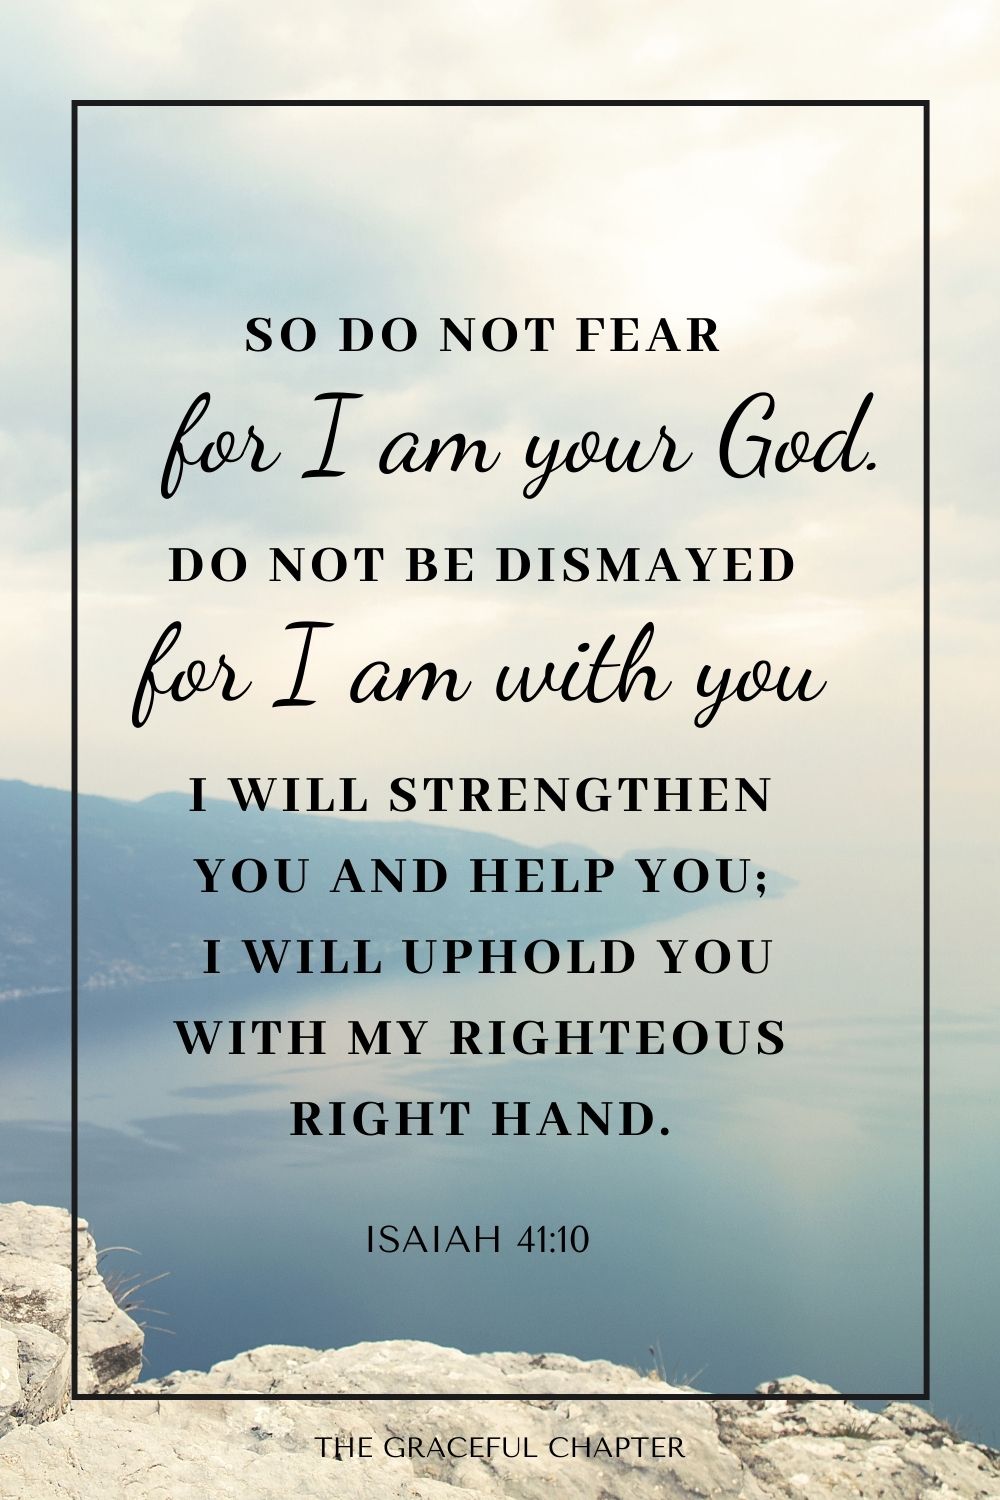 So do not fear, for I am with you;  do not be dismayed, for I am your God. I will strengthen you and help you; I will uphold you with my righteous right hand. Isaiah 41:10